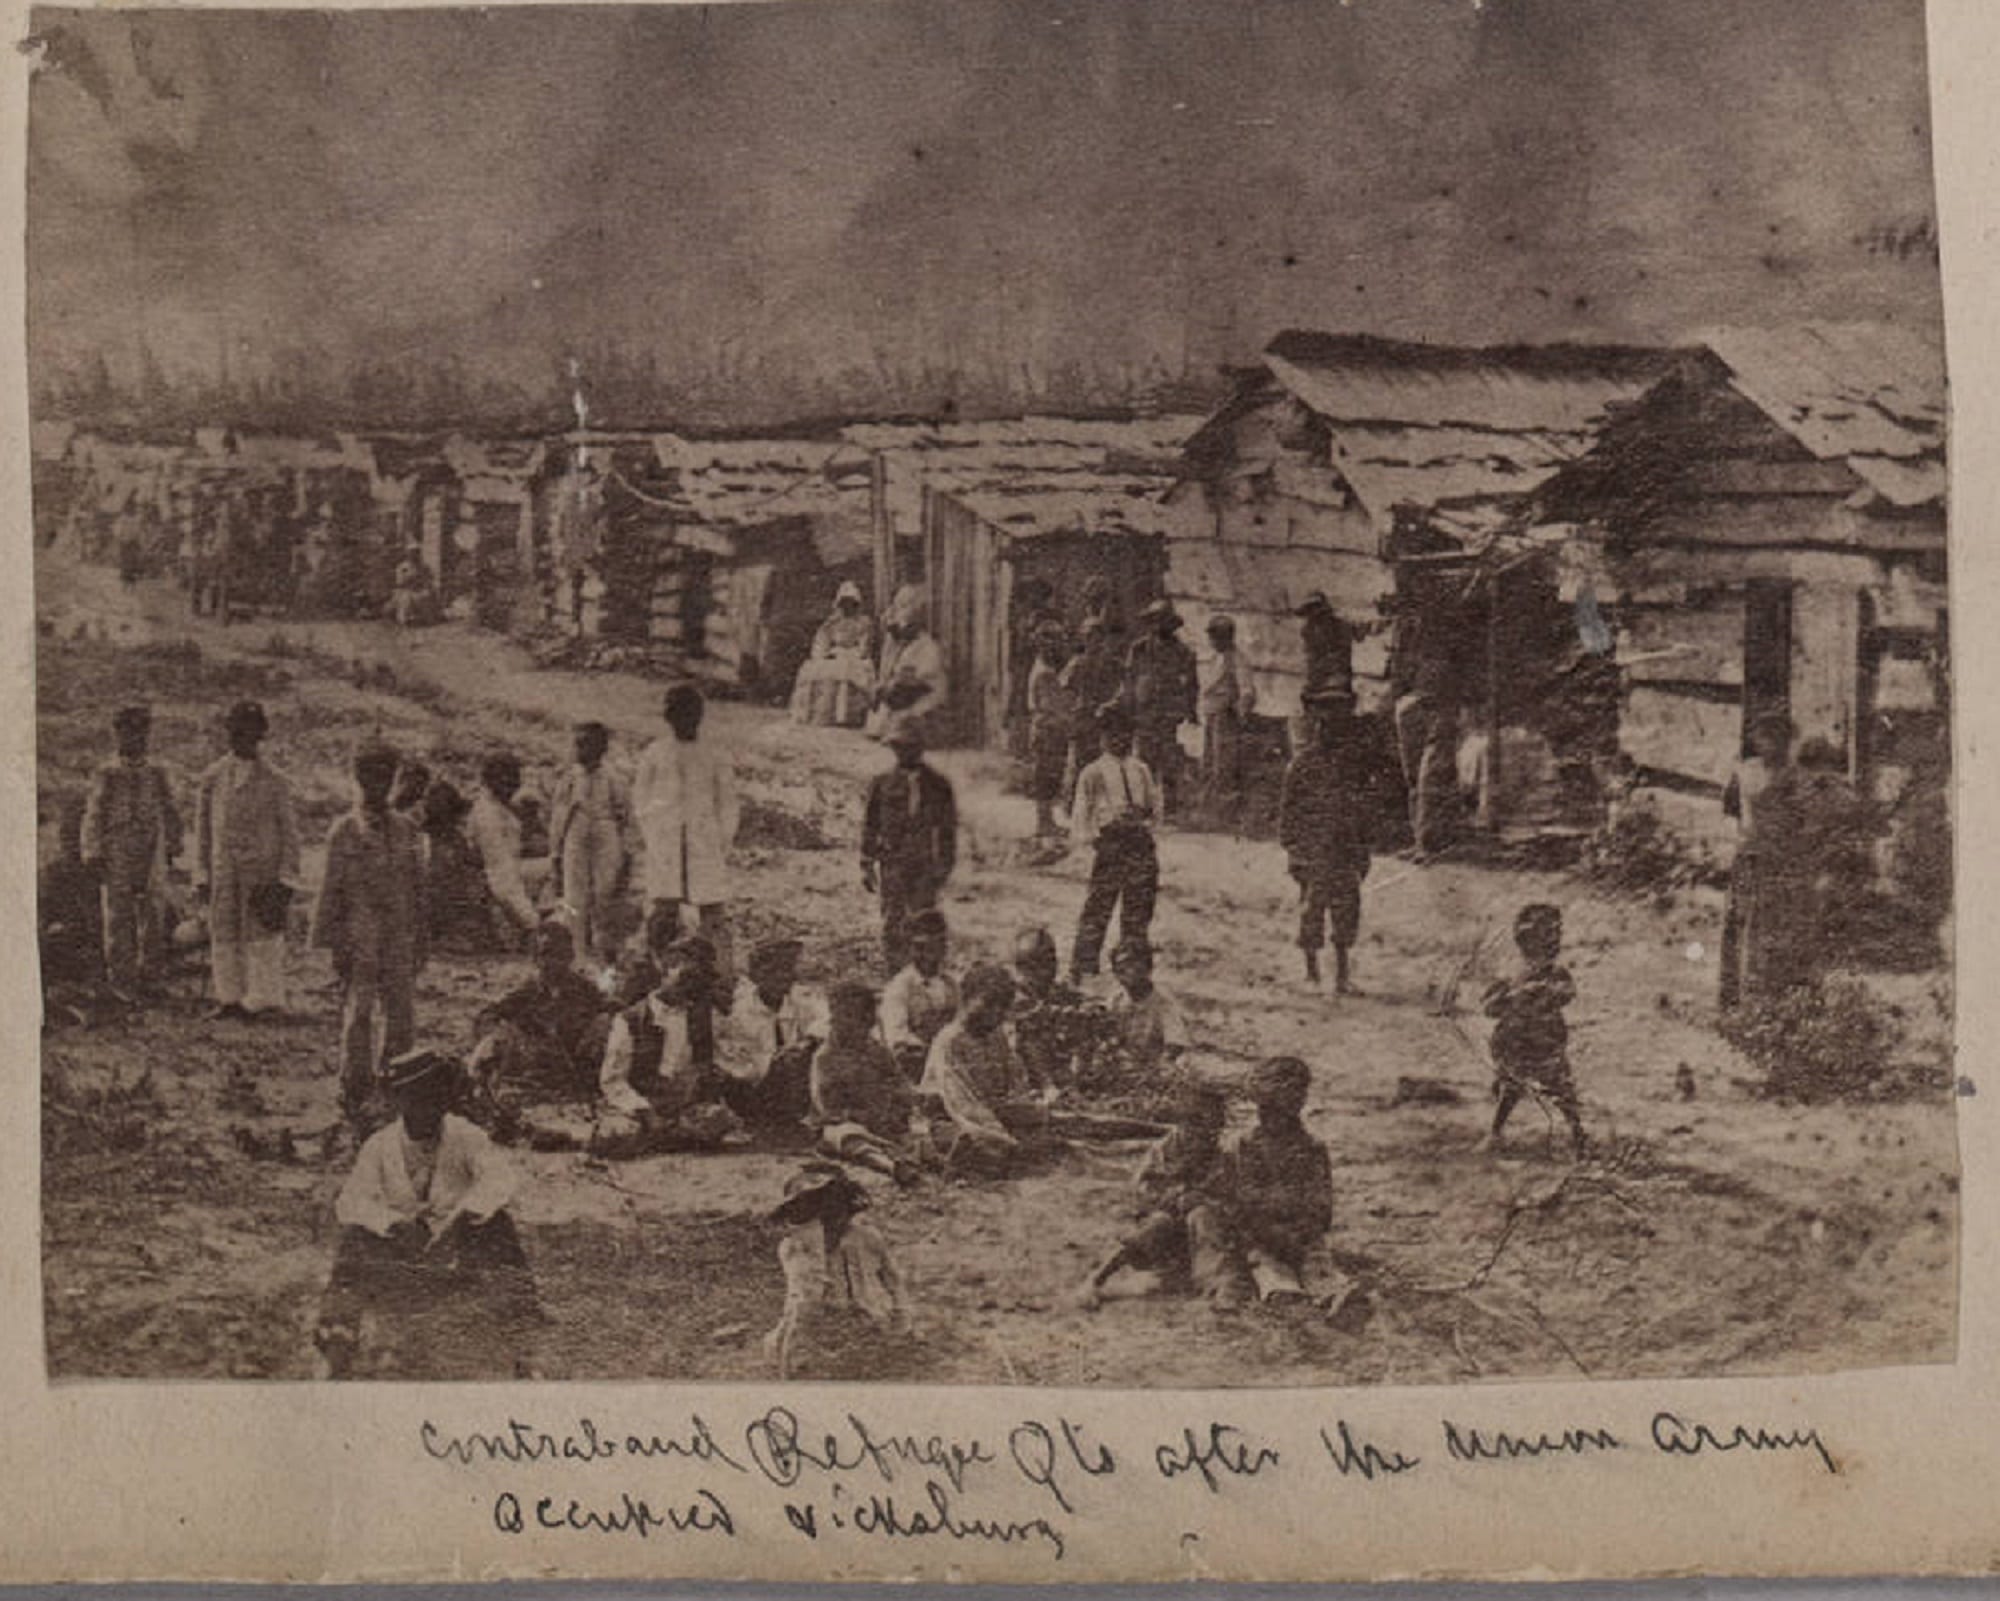 <em>Contraband Refugee Quarters after the Union Army occupied Vicksburg,</em> 1863–65 (<a href="https://cdm16003.contentdm.oclc.org/digital/collection/p16003coll6/id/3707" target="_blank" rel="noopener">Huntington Library</a>)